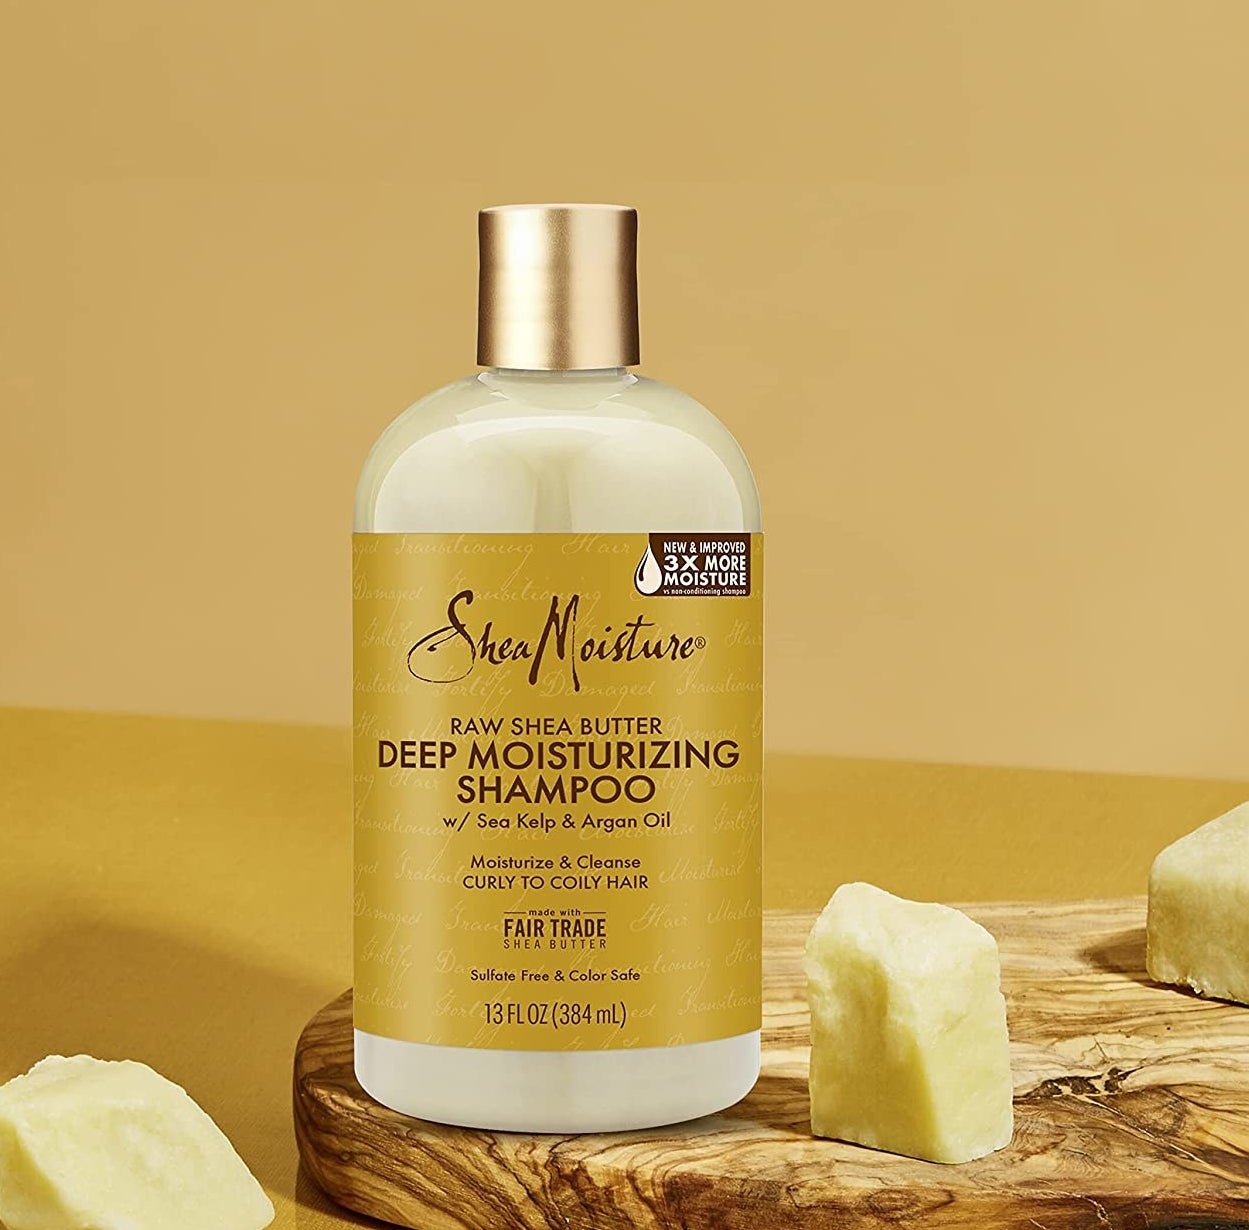 The bottle on a wooden platter surrounded by hunks of shea butter